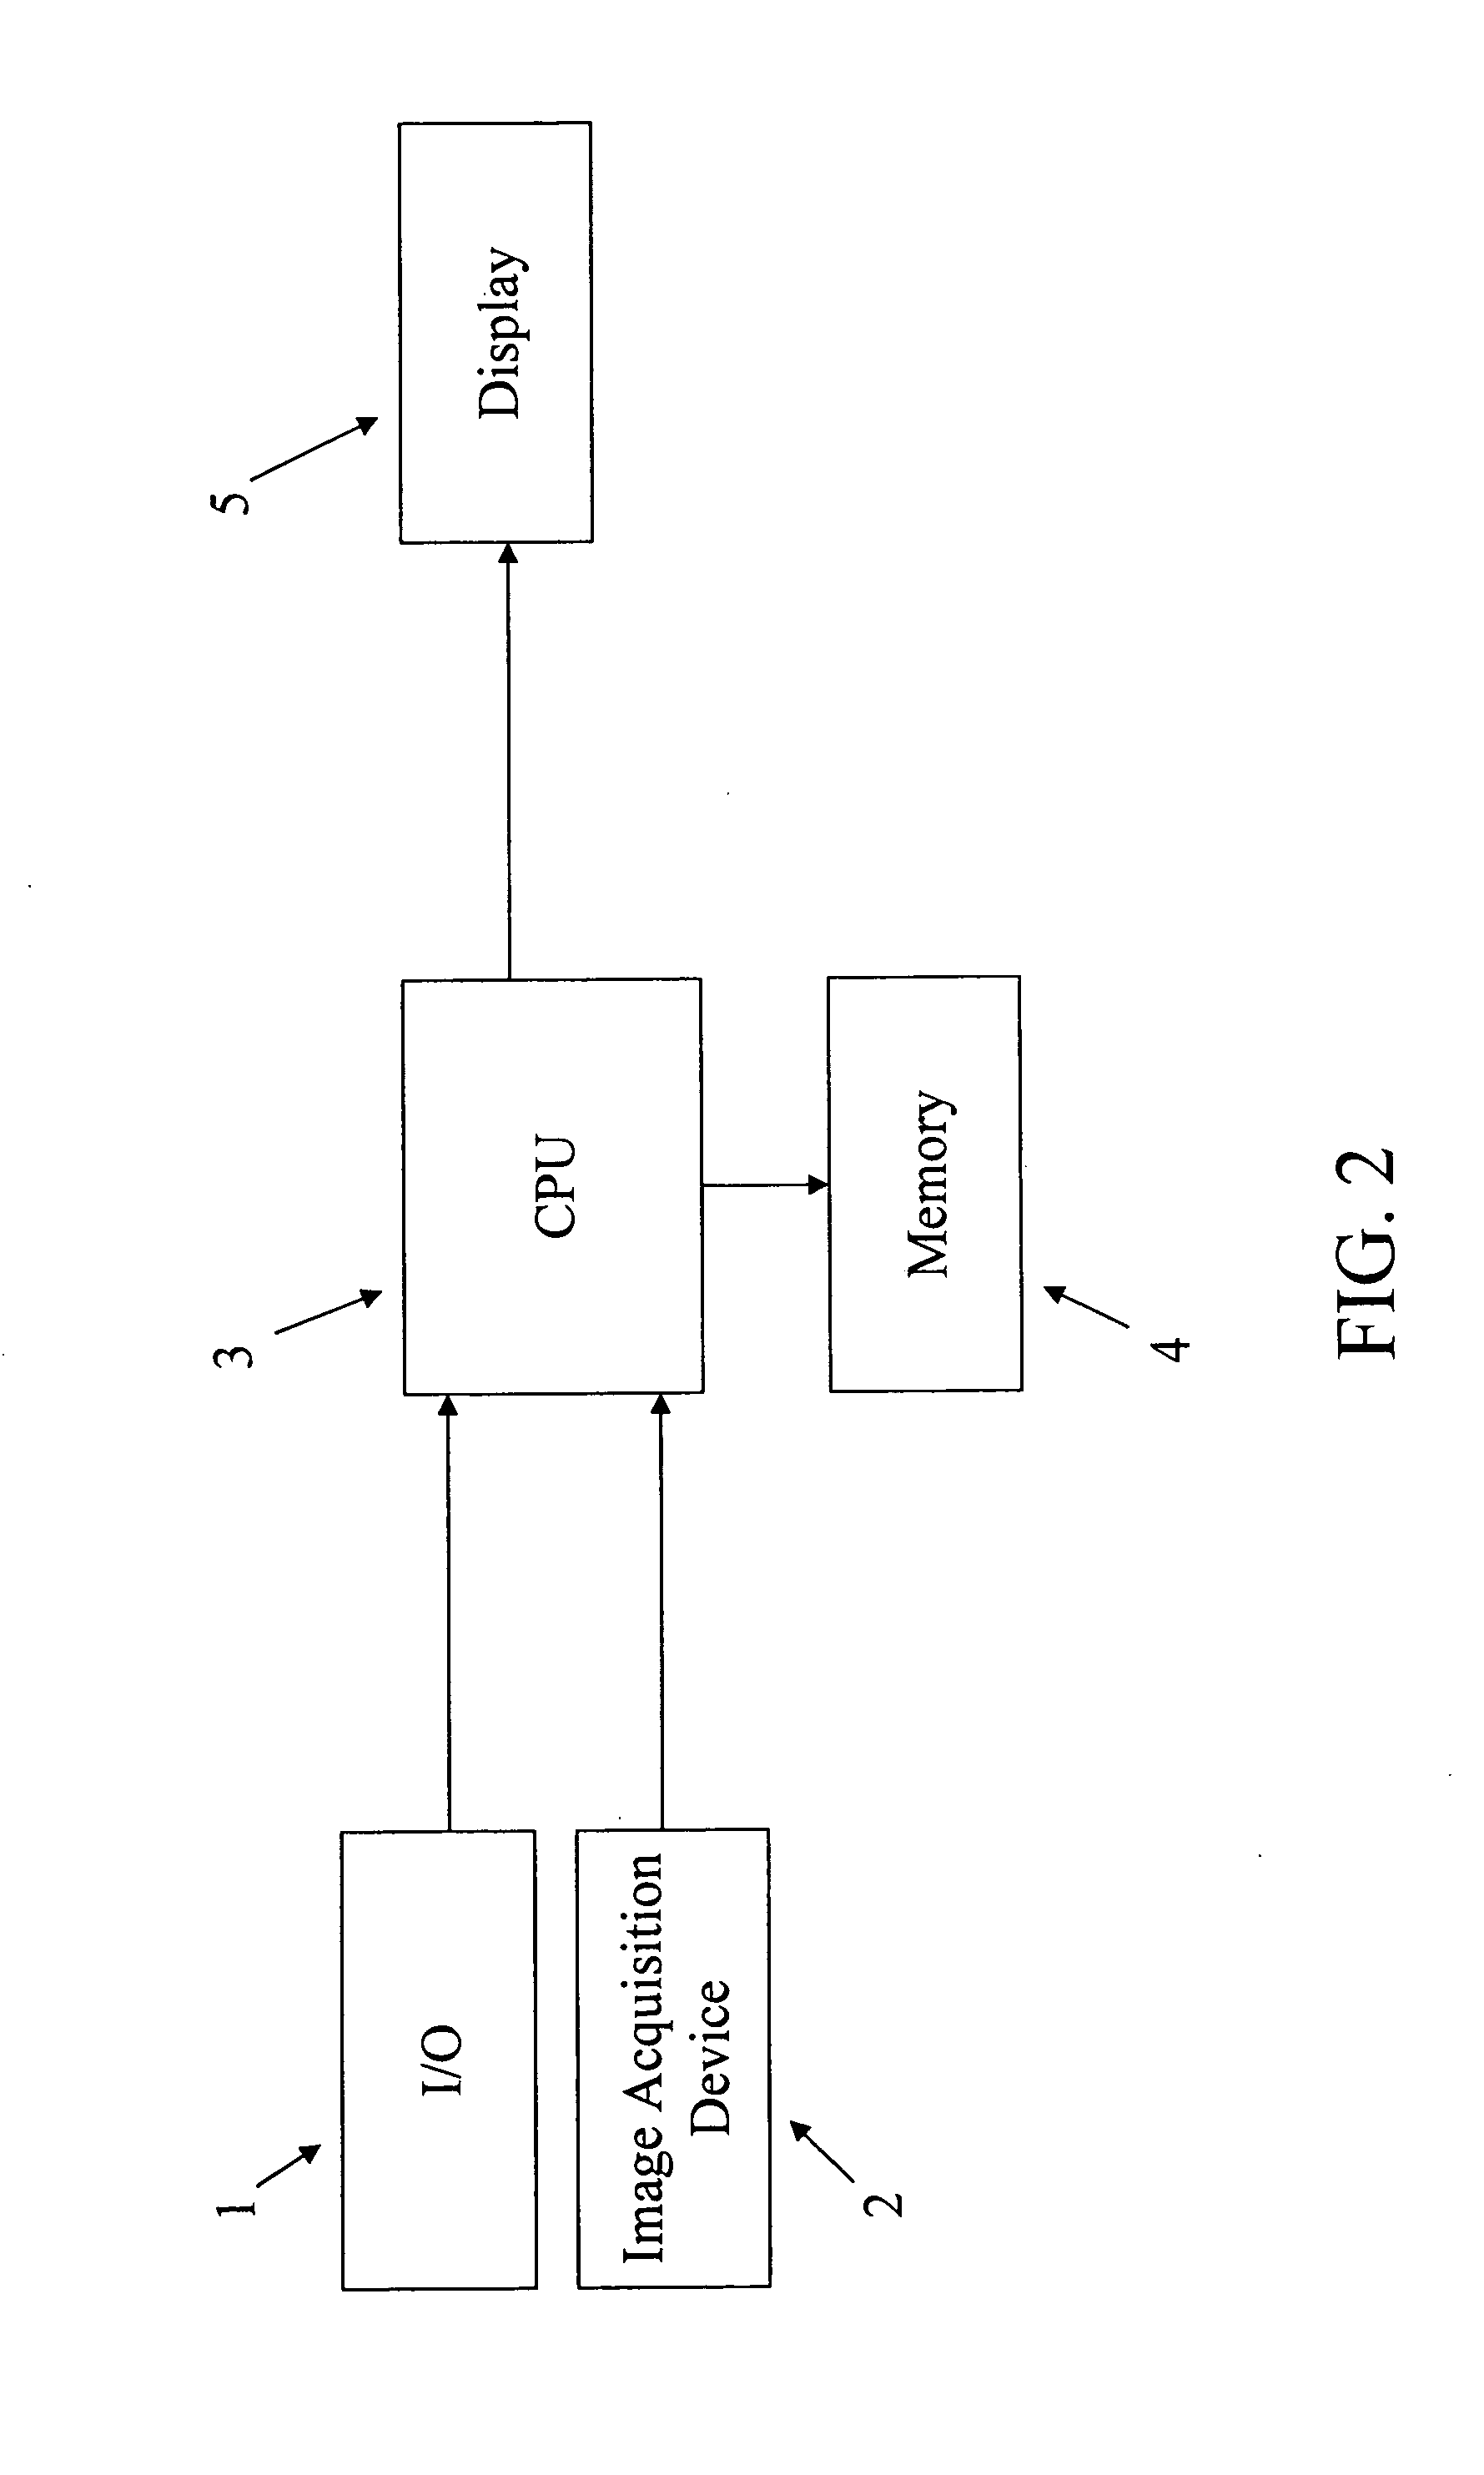 Method for enhancing polarimeter systems that use micro-polarizers